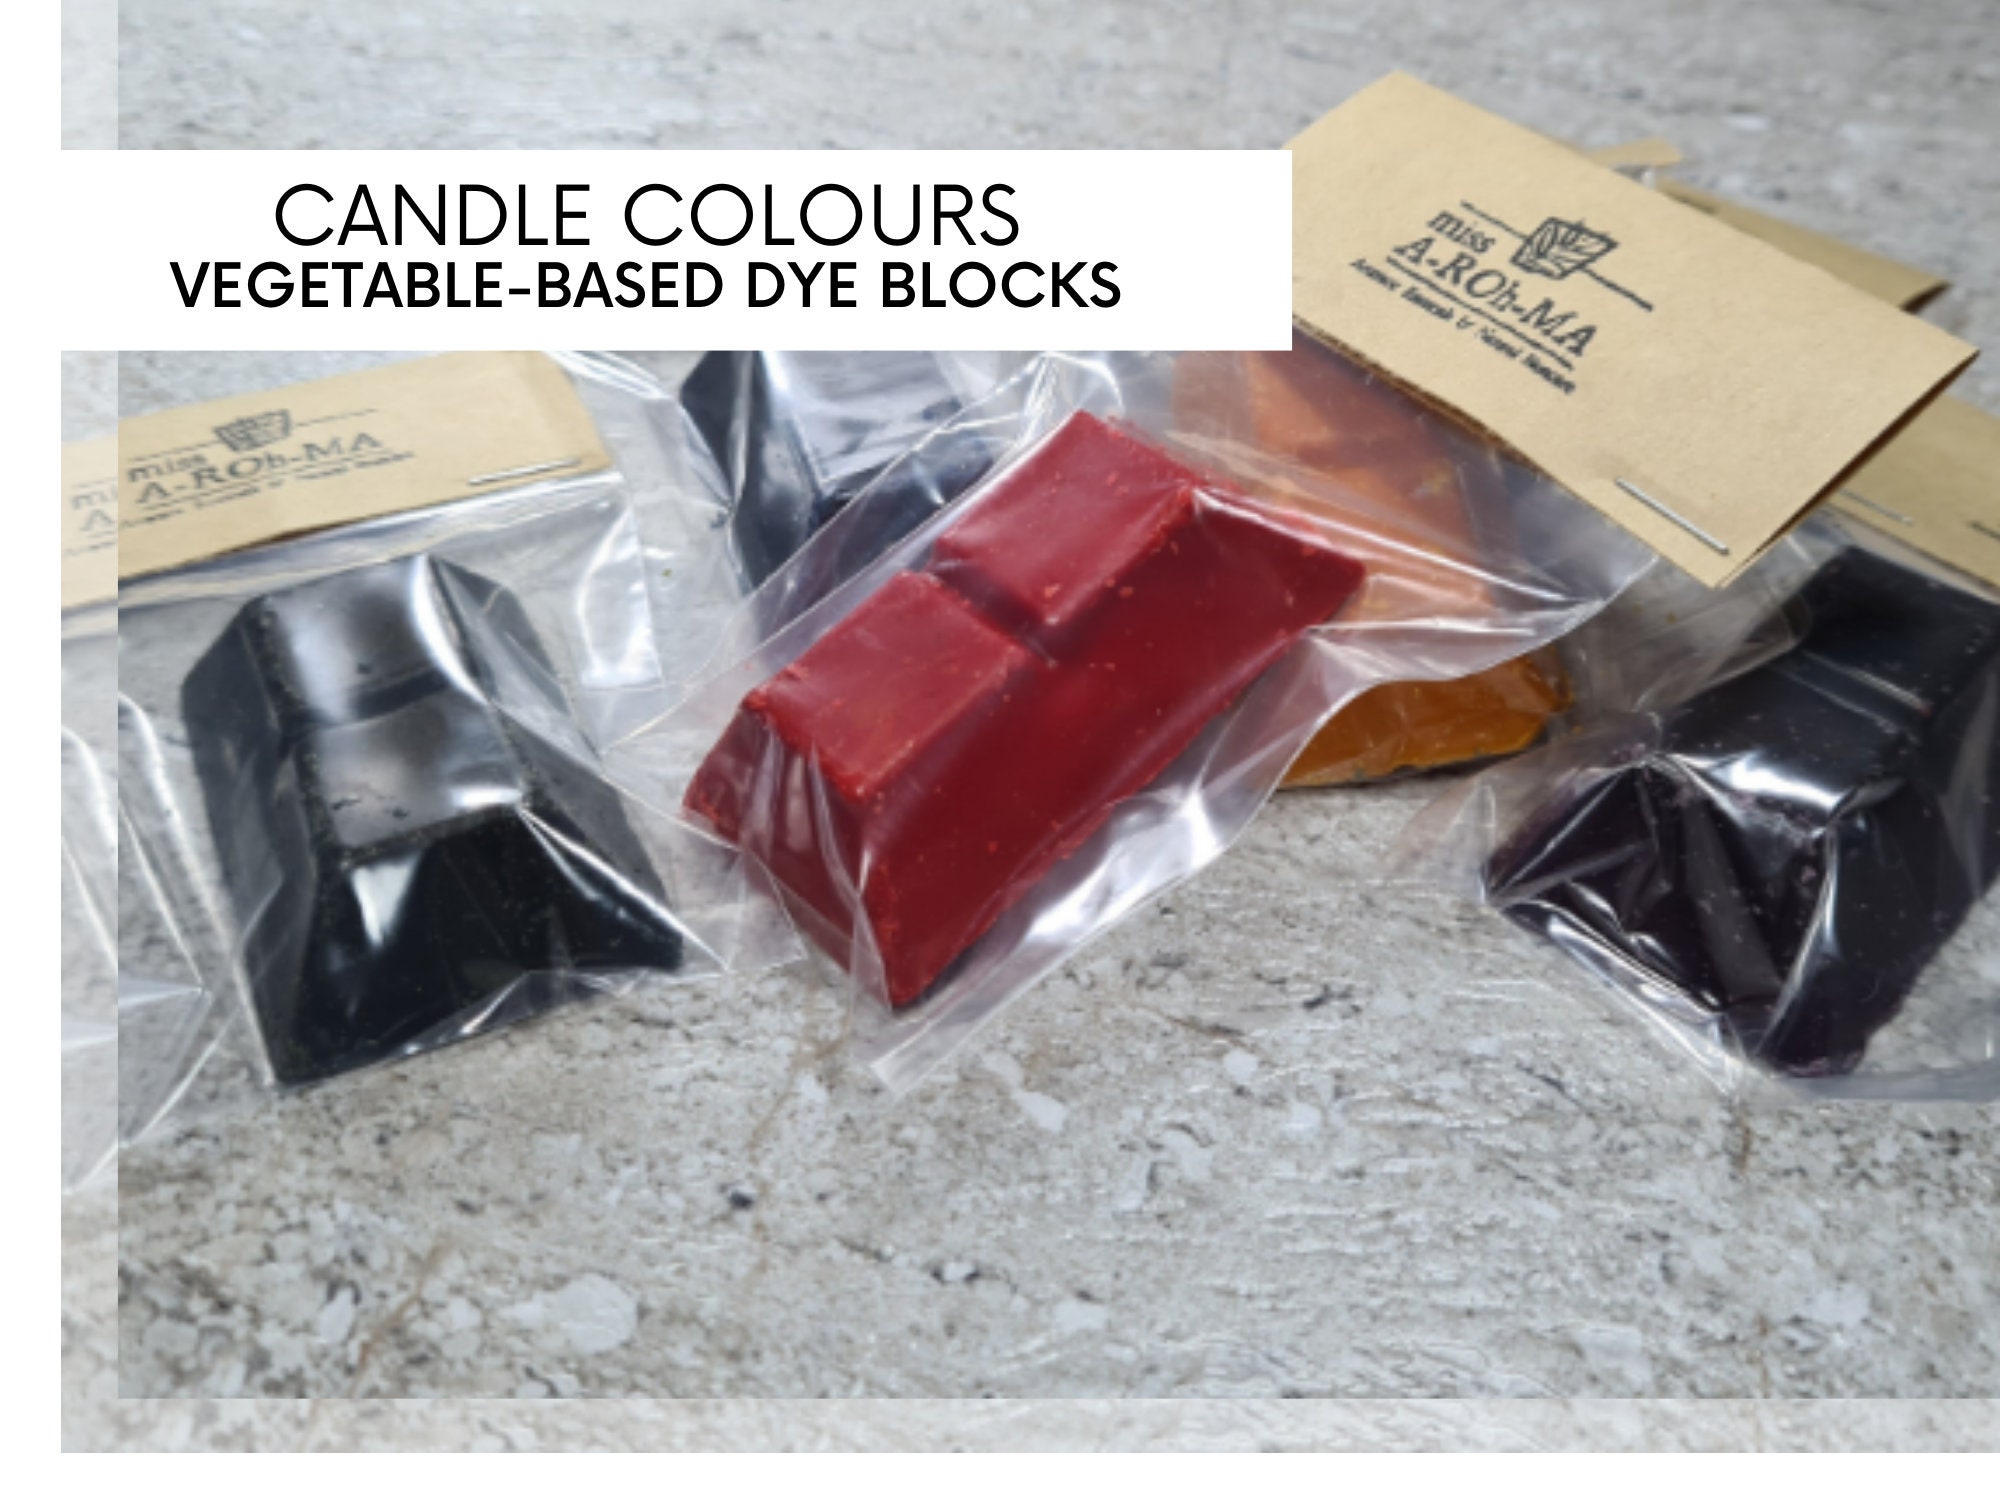 Wax Dye 24 Colors-Candle Color Dye - Candle Dye Blocks - Candle